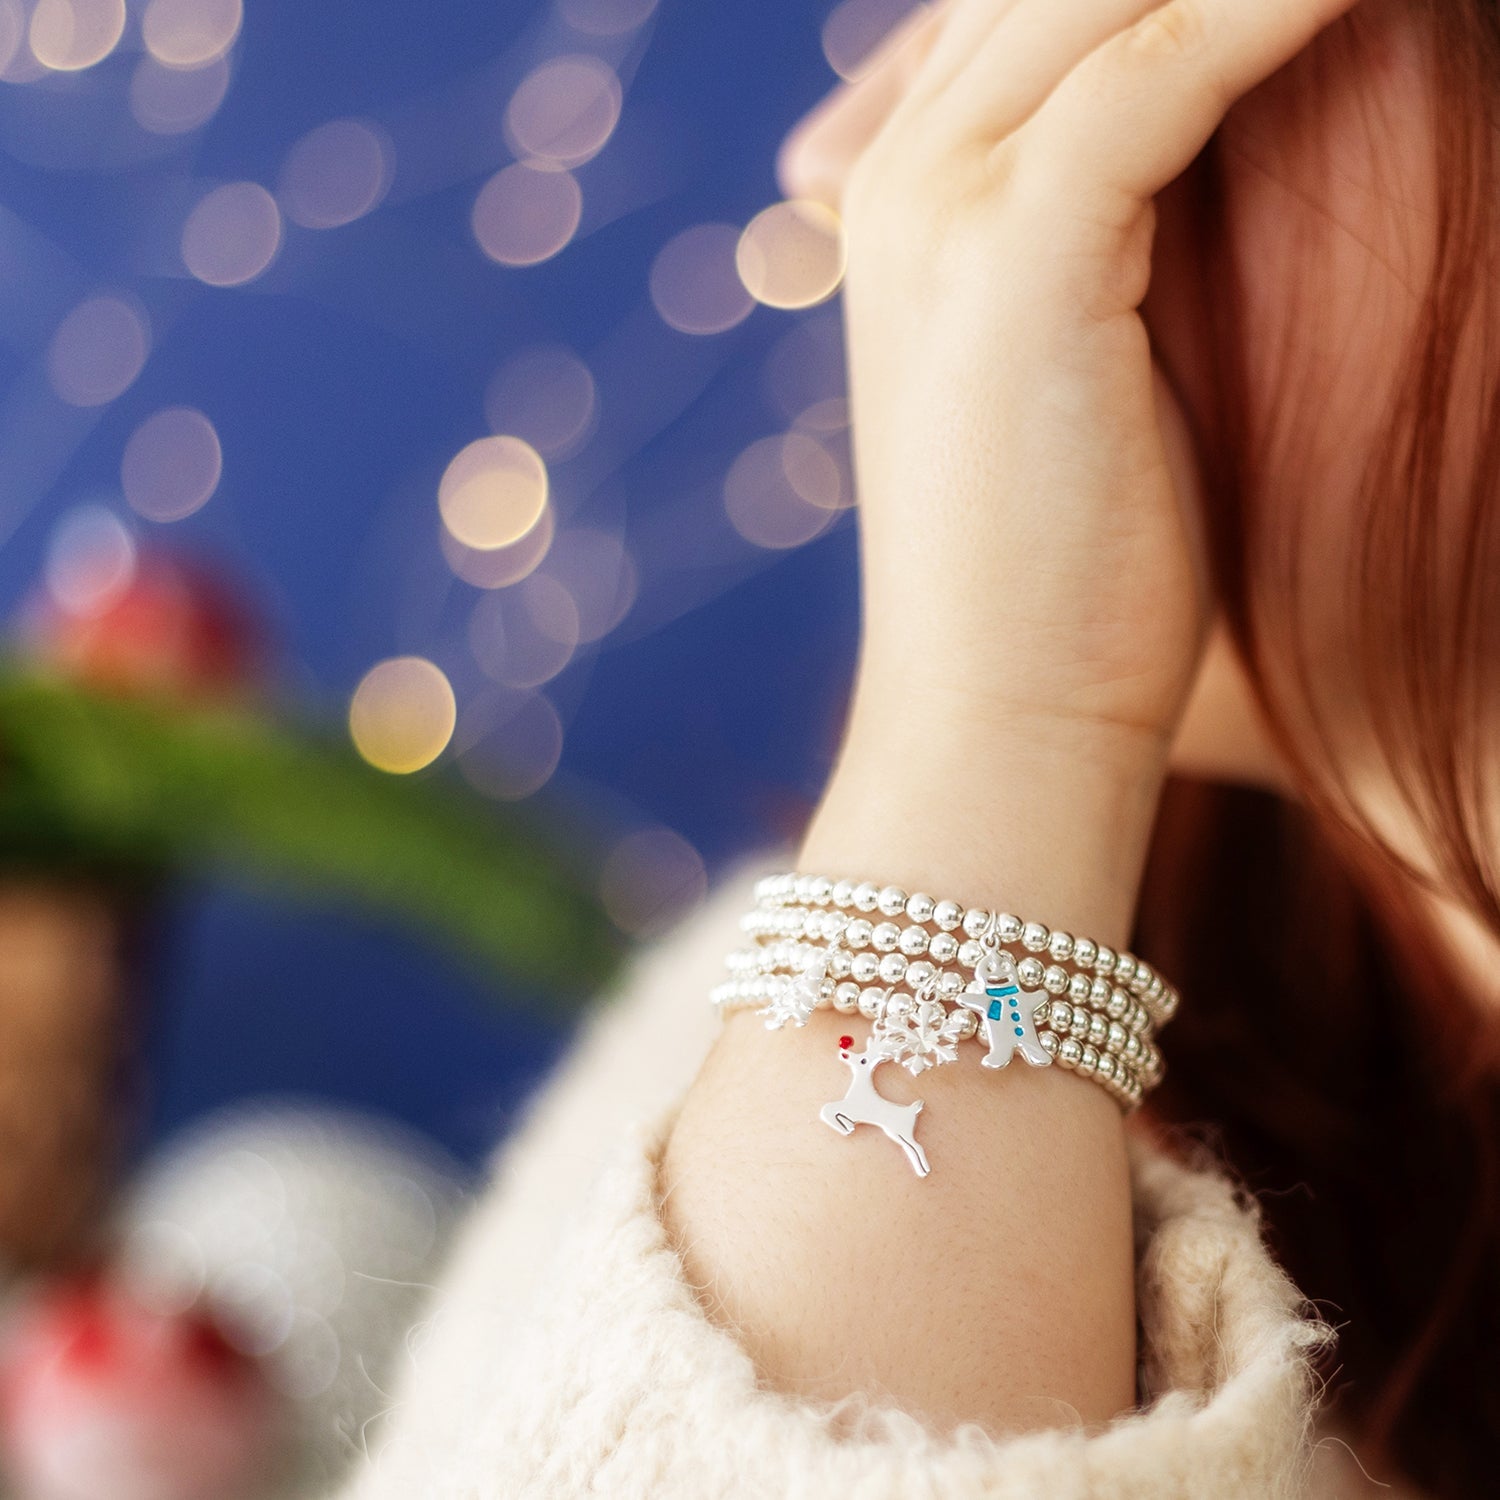  A person with long hair is wearing several silver beaded bracelets featuring charms, perfect as a Christmas jewellery gift. The background is blurred with lights, with a festive atmosphere. The person is partially covering their face with one hand